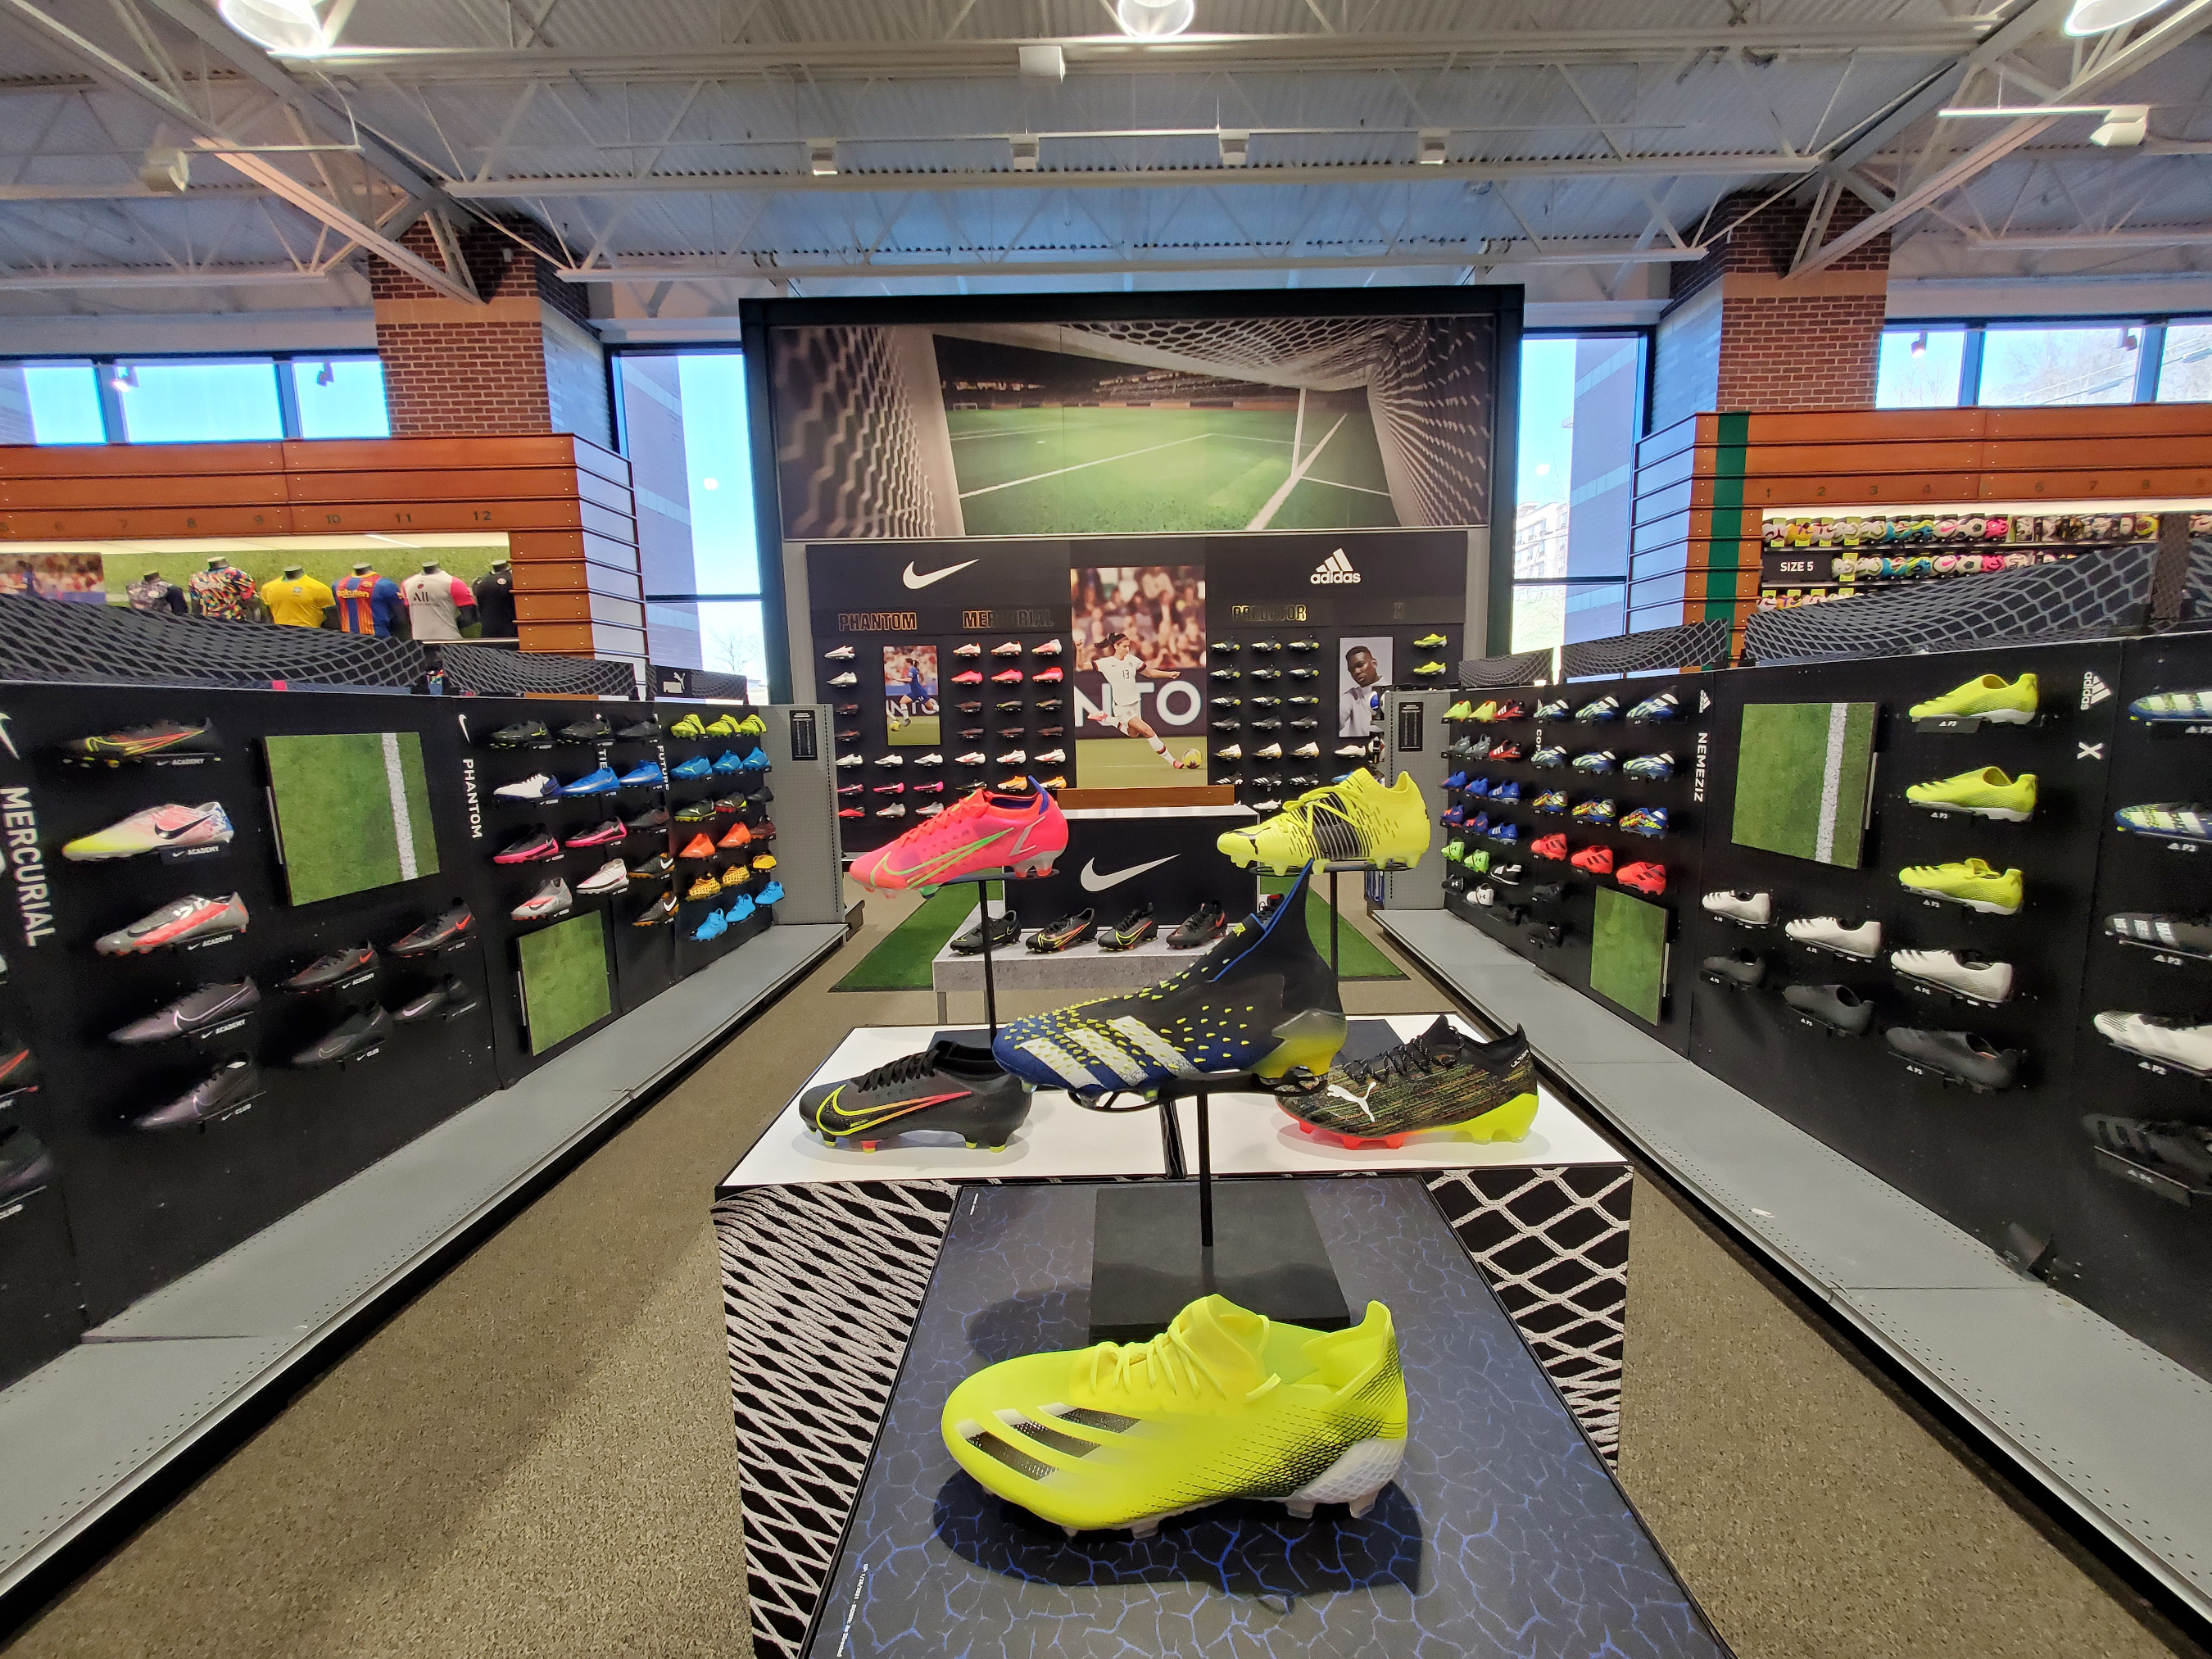 Dicks Sporting Goods Announces Grand Opening Of New Concept Store Dicks House Of Sport And Expands Offerings In Select Golf Galaxy Locations Nationwide